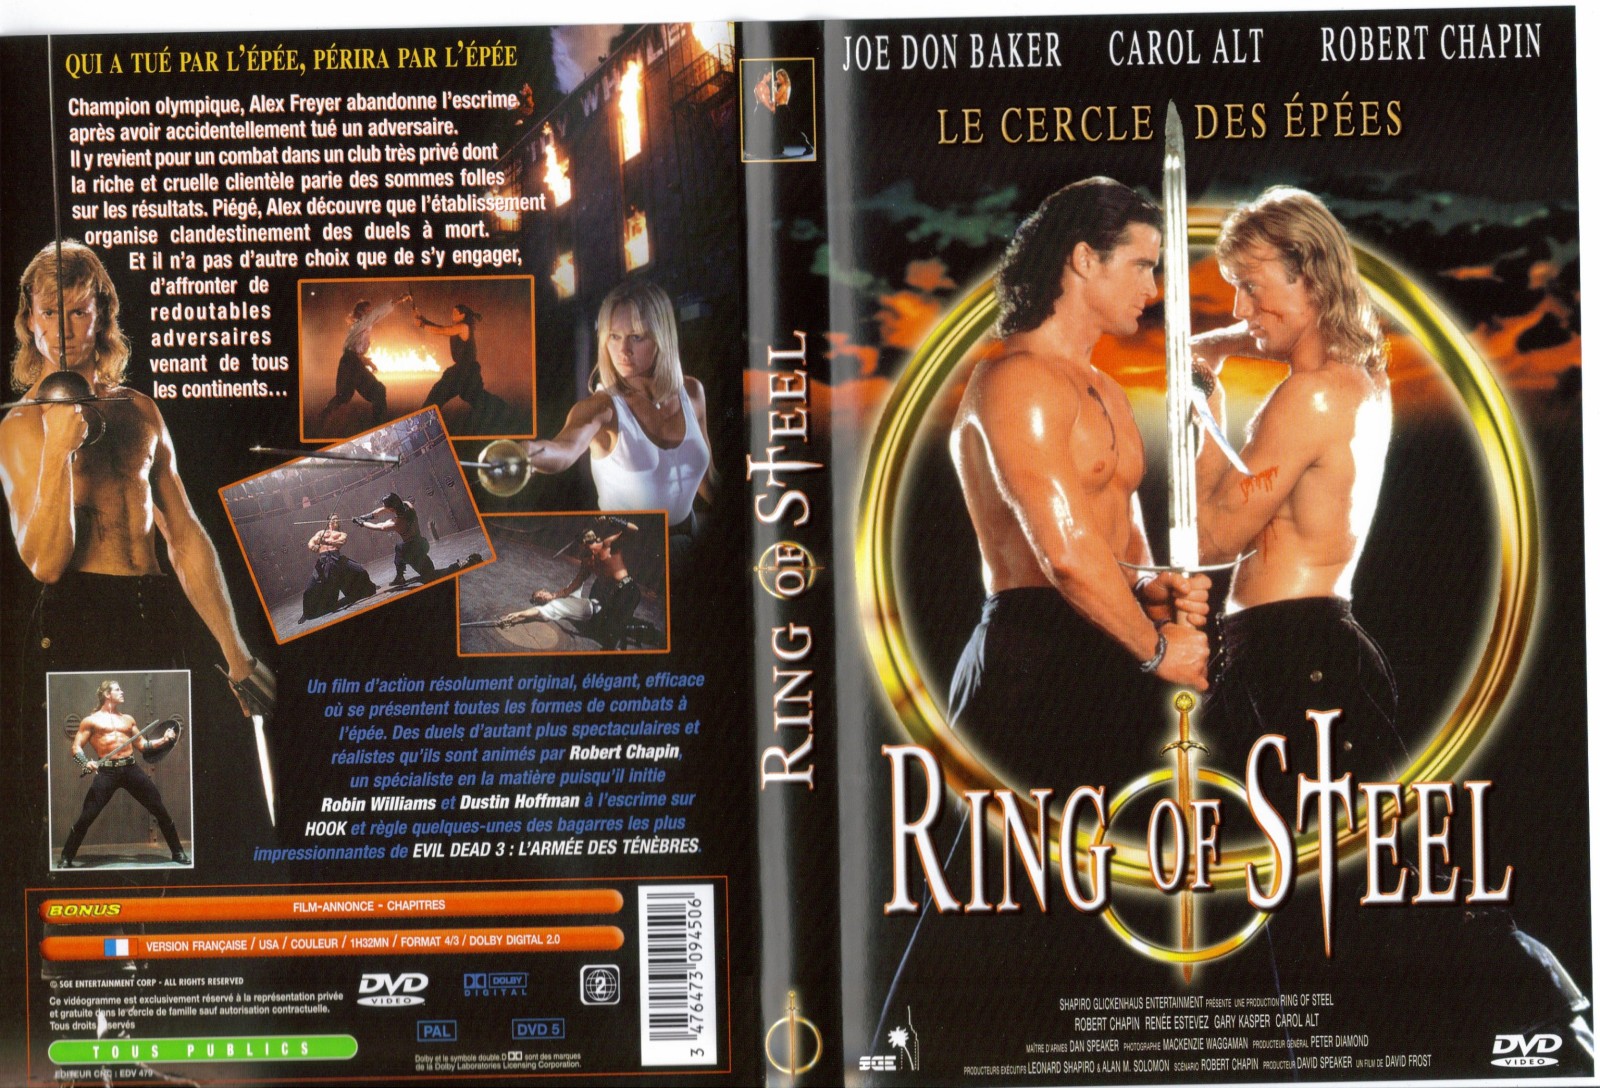 Jaquette DVD Ring of steel